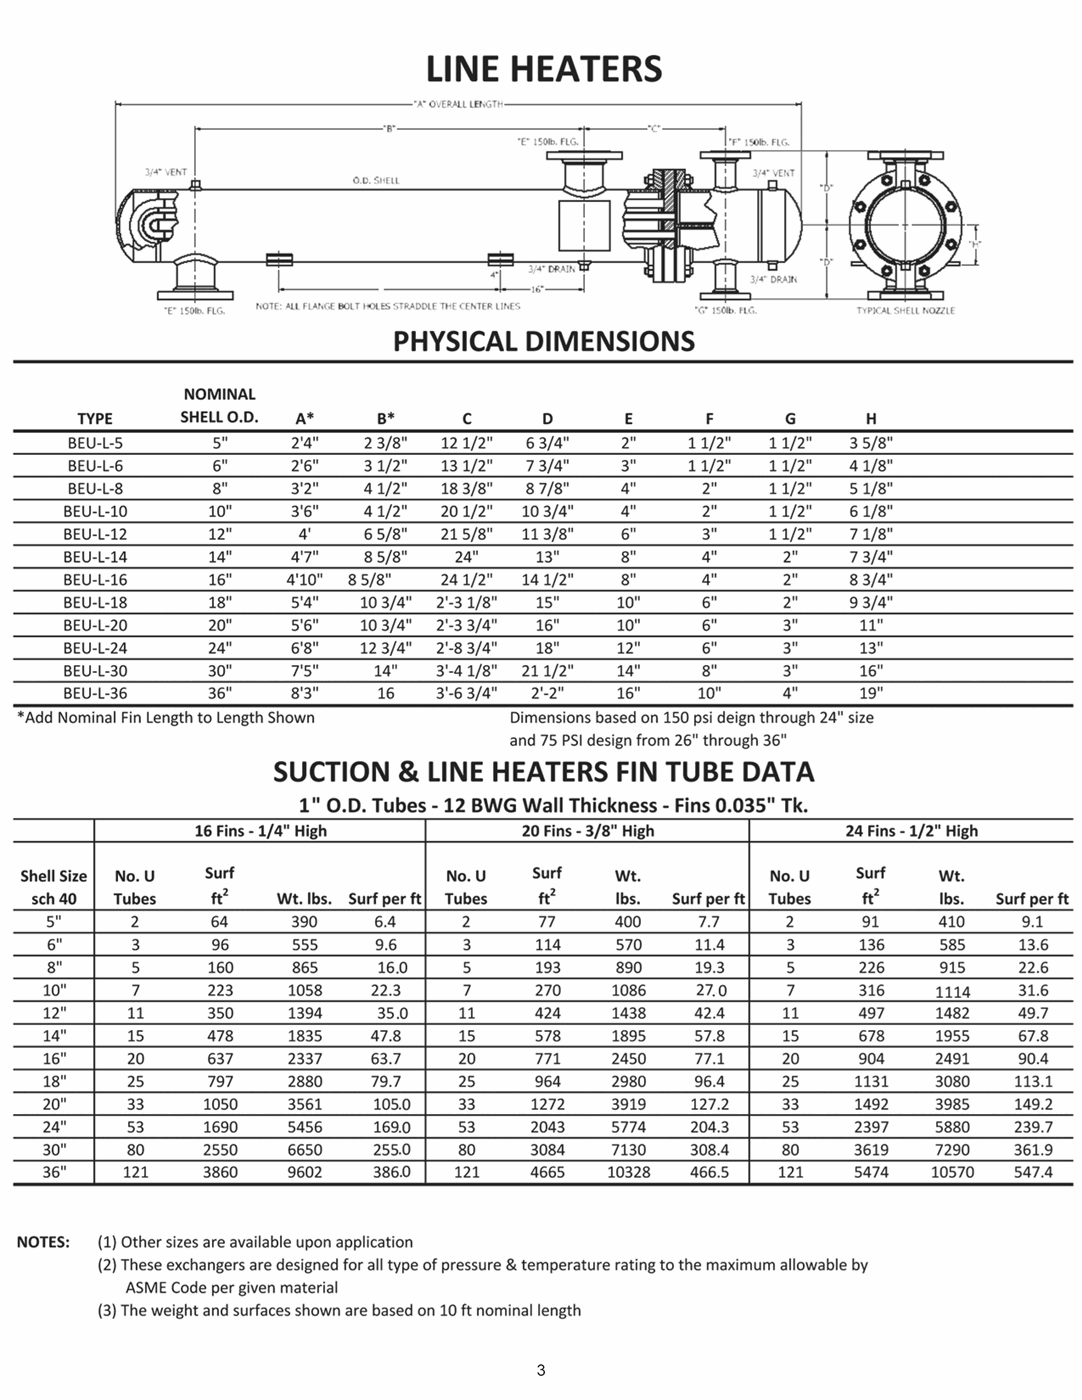 Line Heaters Physical Dimensions, fin tube data